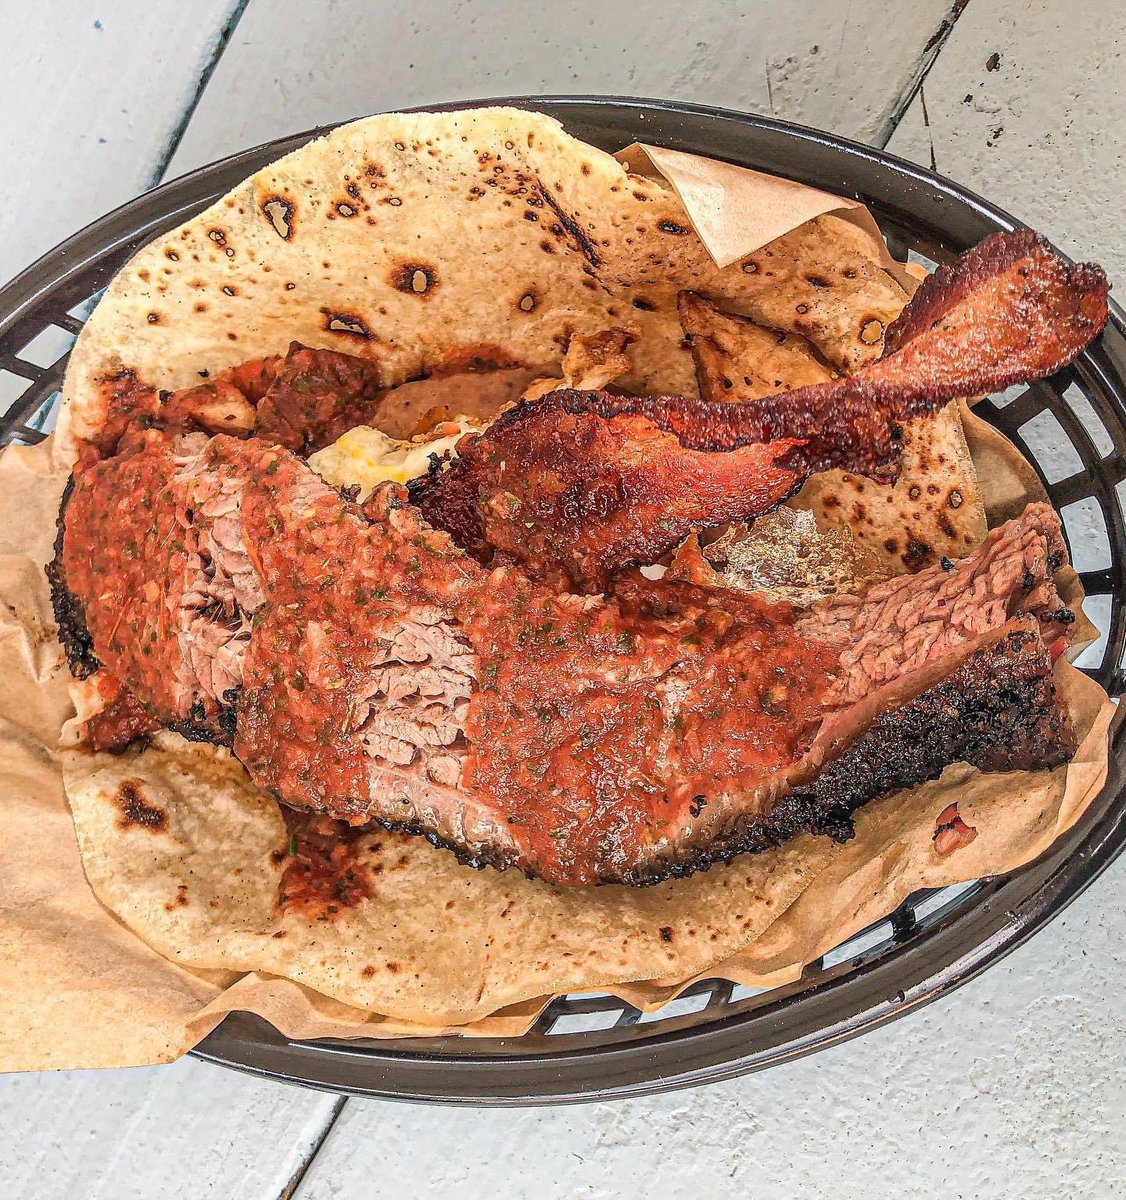 In today’s issue, @bbqtourist shares five of the best brisket dishes you need to try around that country, from @BlakeStoker5, @BuckTuiBBQ, @panthercitybbq, @truth_bbq, & @Valstexmexbbq. Read here: bbqnewsletter.substack.com/p/five-incredi…